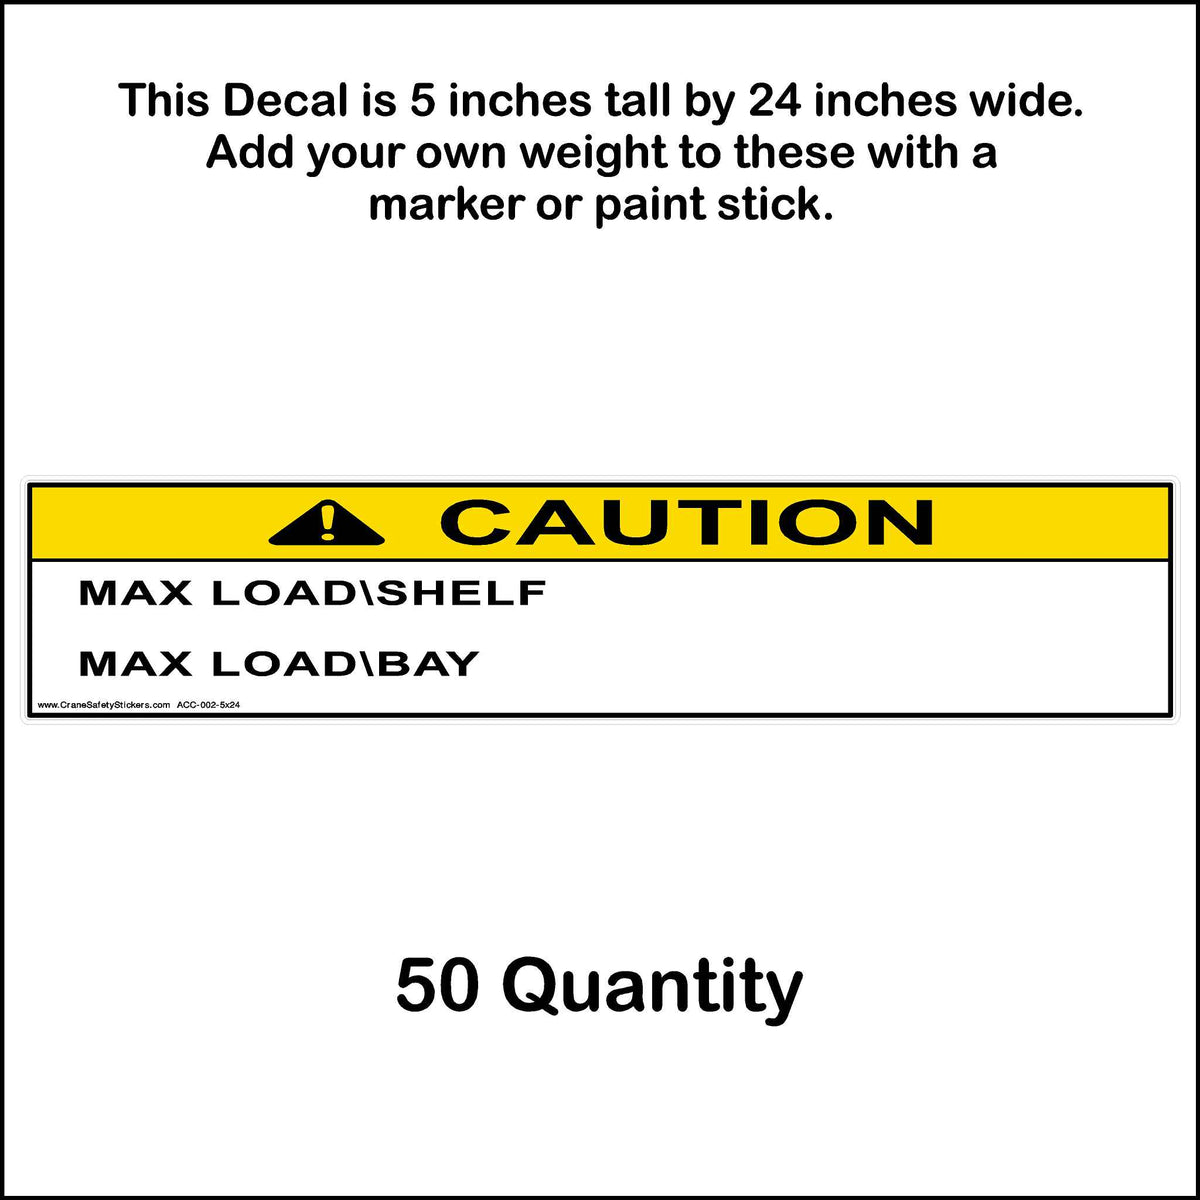 5 inches by 24 inches maximum load shelf and maximum load bay sticker 50 quantity.